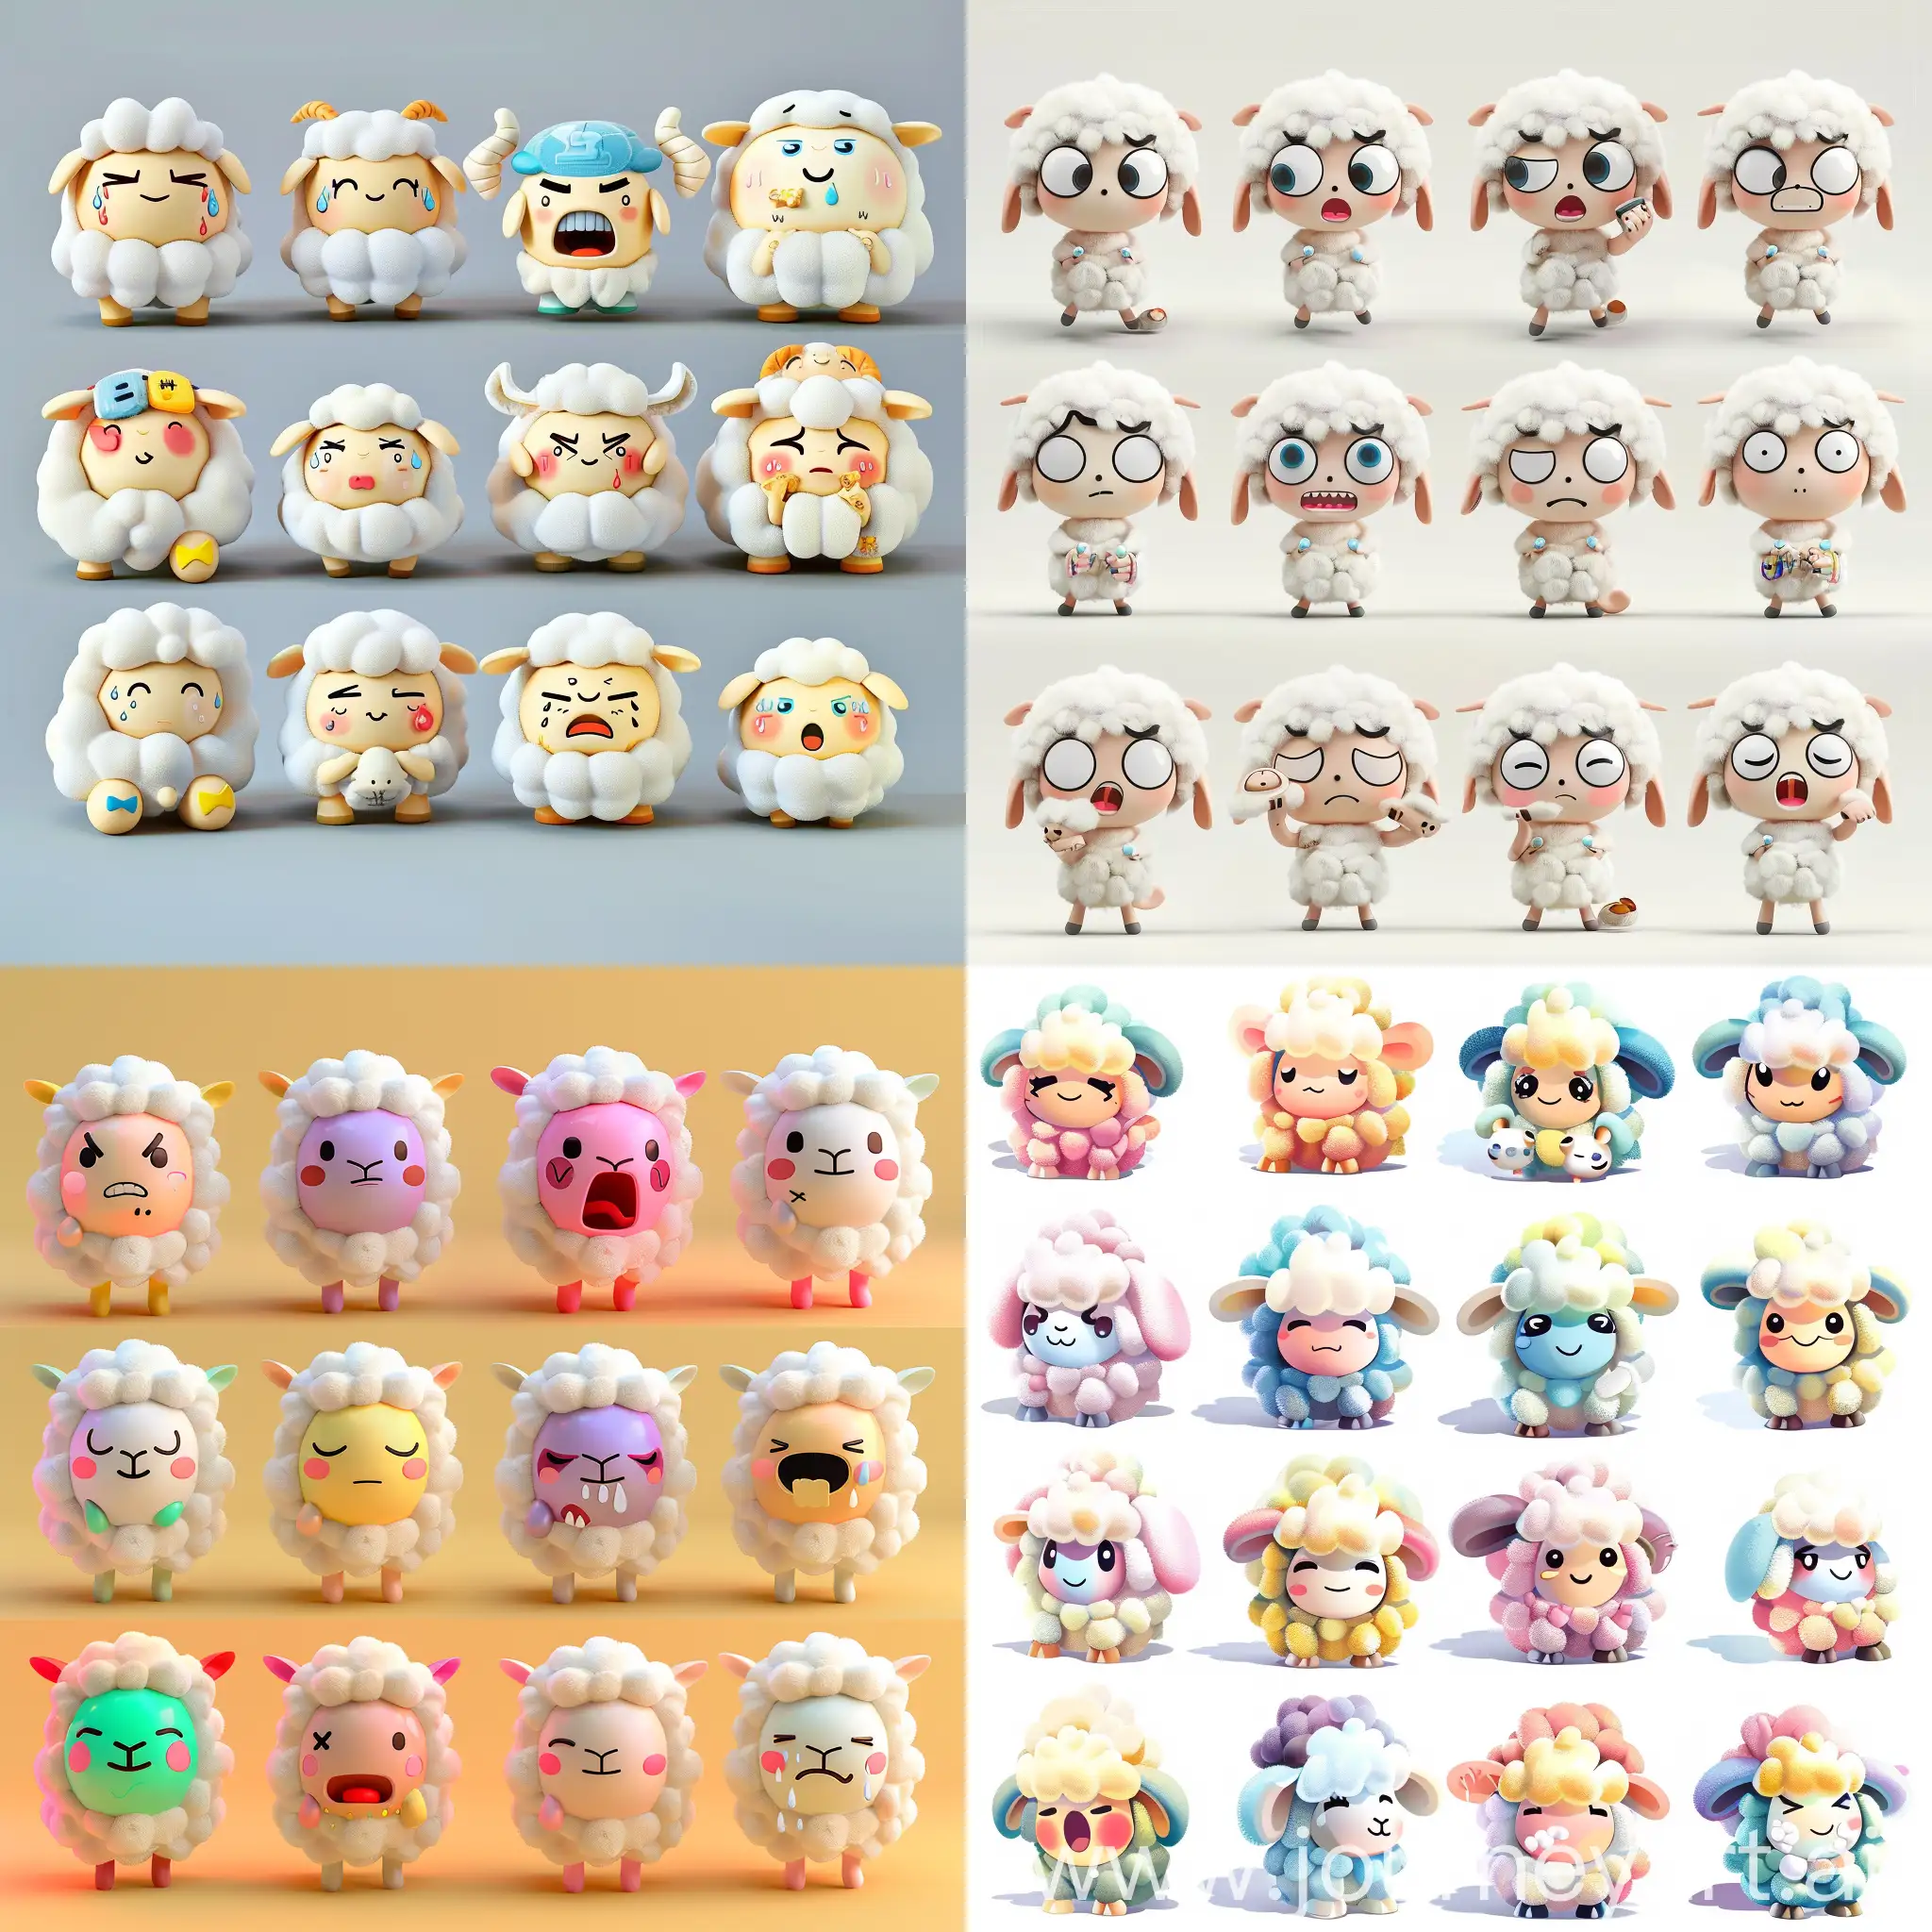 Adorable-Plush-Sheep-Emoji-Pack-Expressive-and-Colorful-Collection